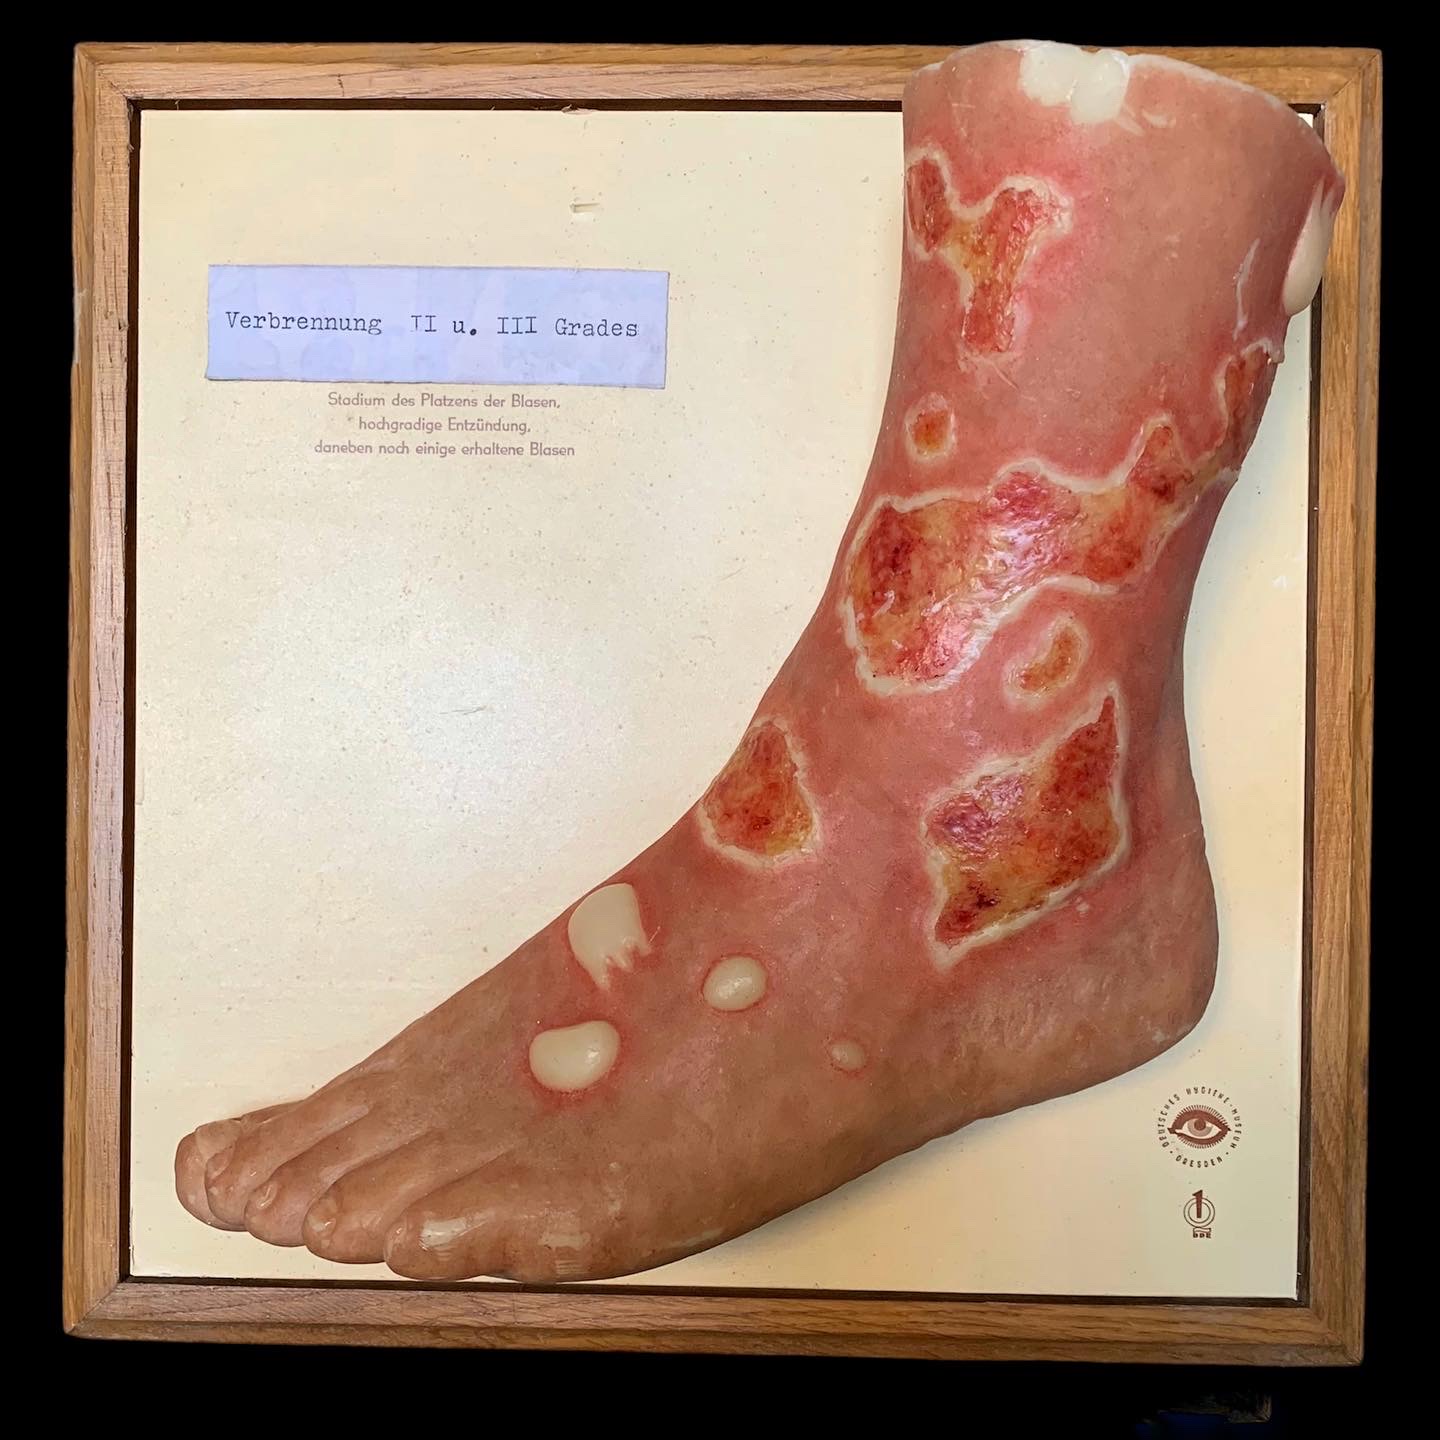 German wax anatomical model of severe burn of the skin of the foot